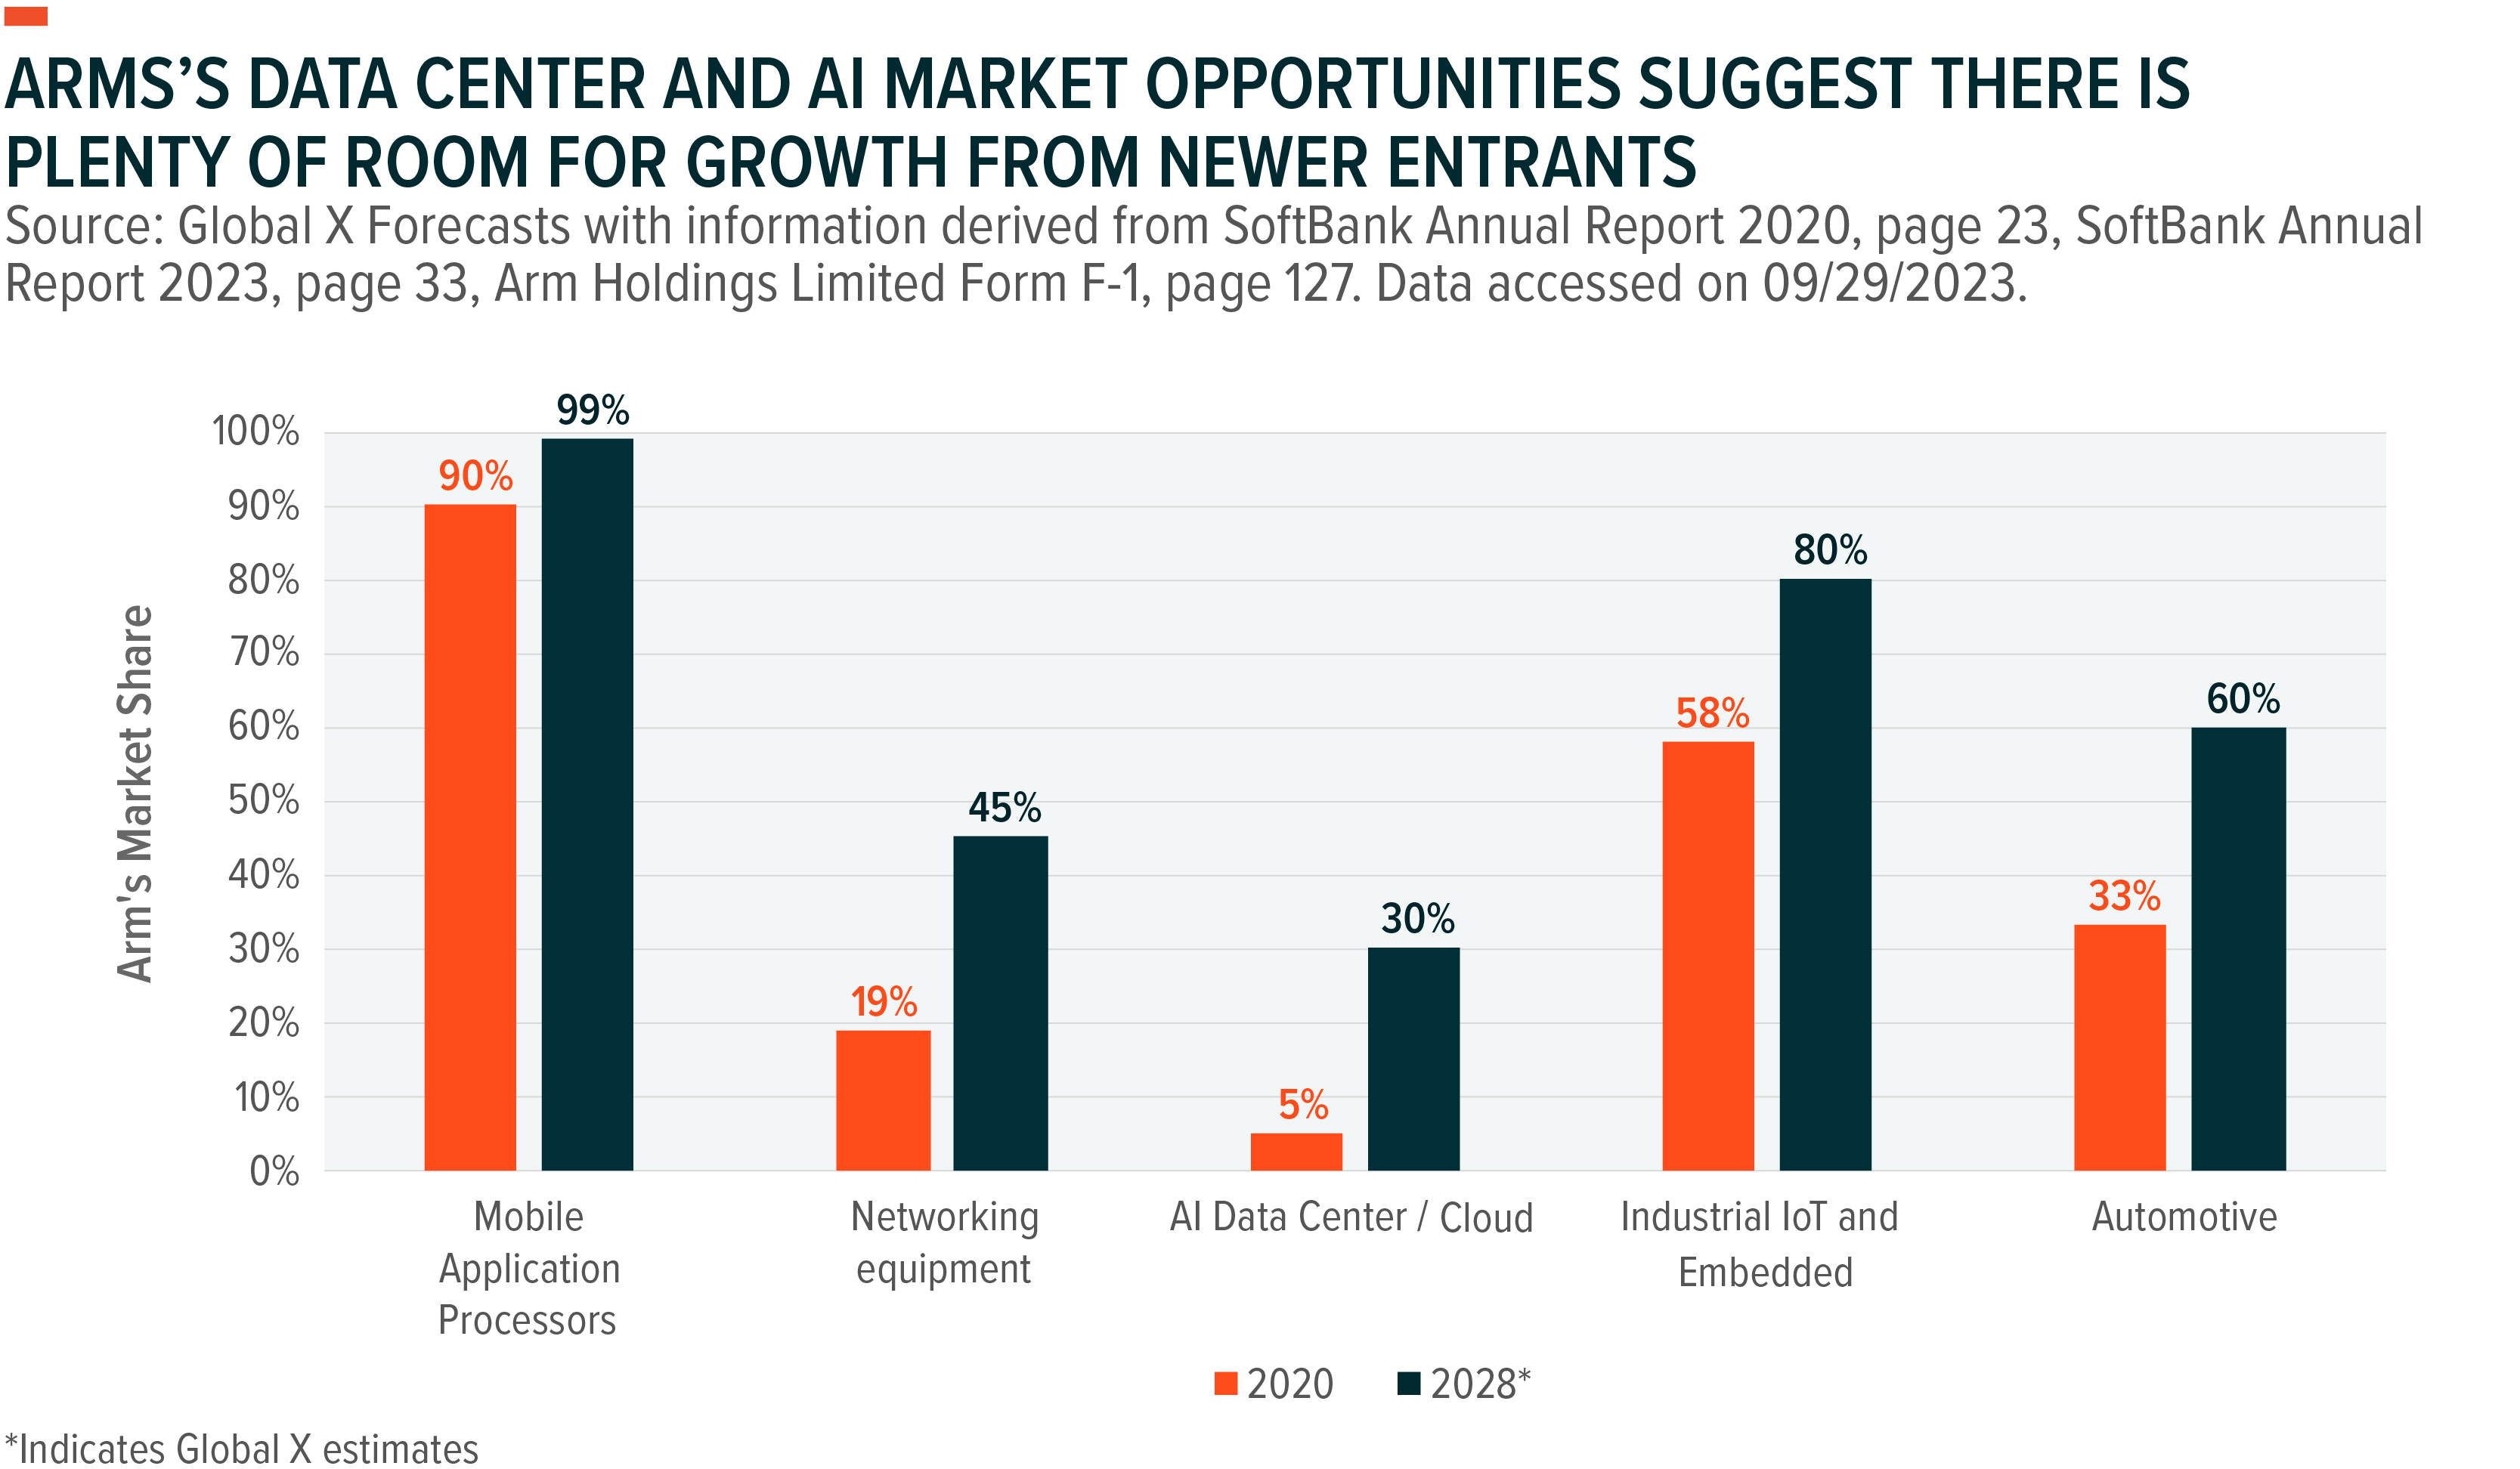 Graph: Arms' Data Center and AI Market Opportunities Suggest There is Plenty of Room for Growth From Newer Entrants